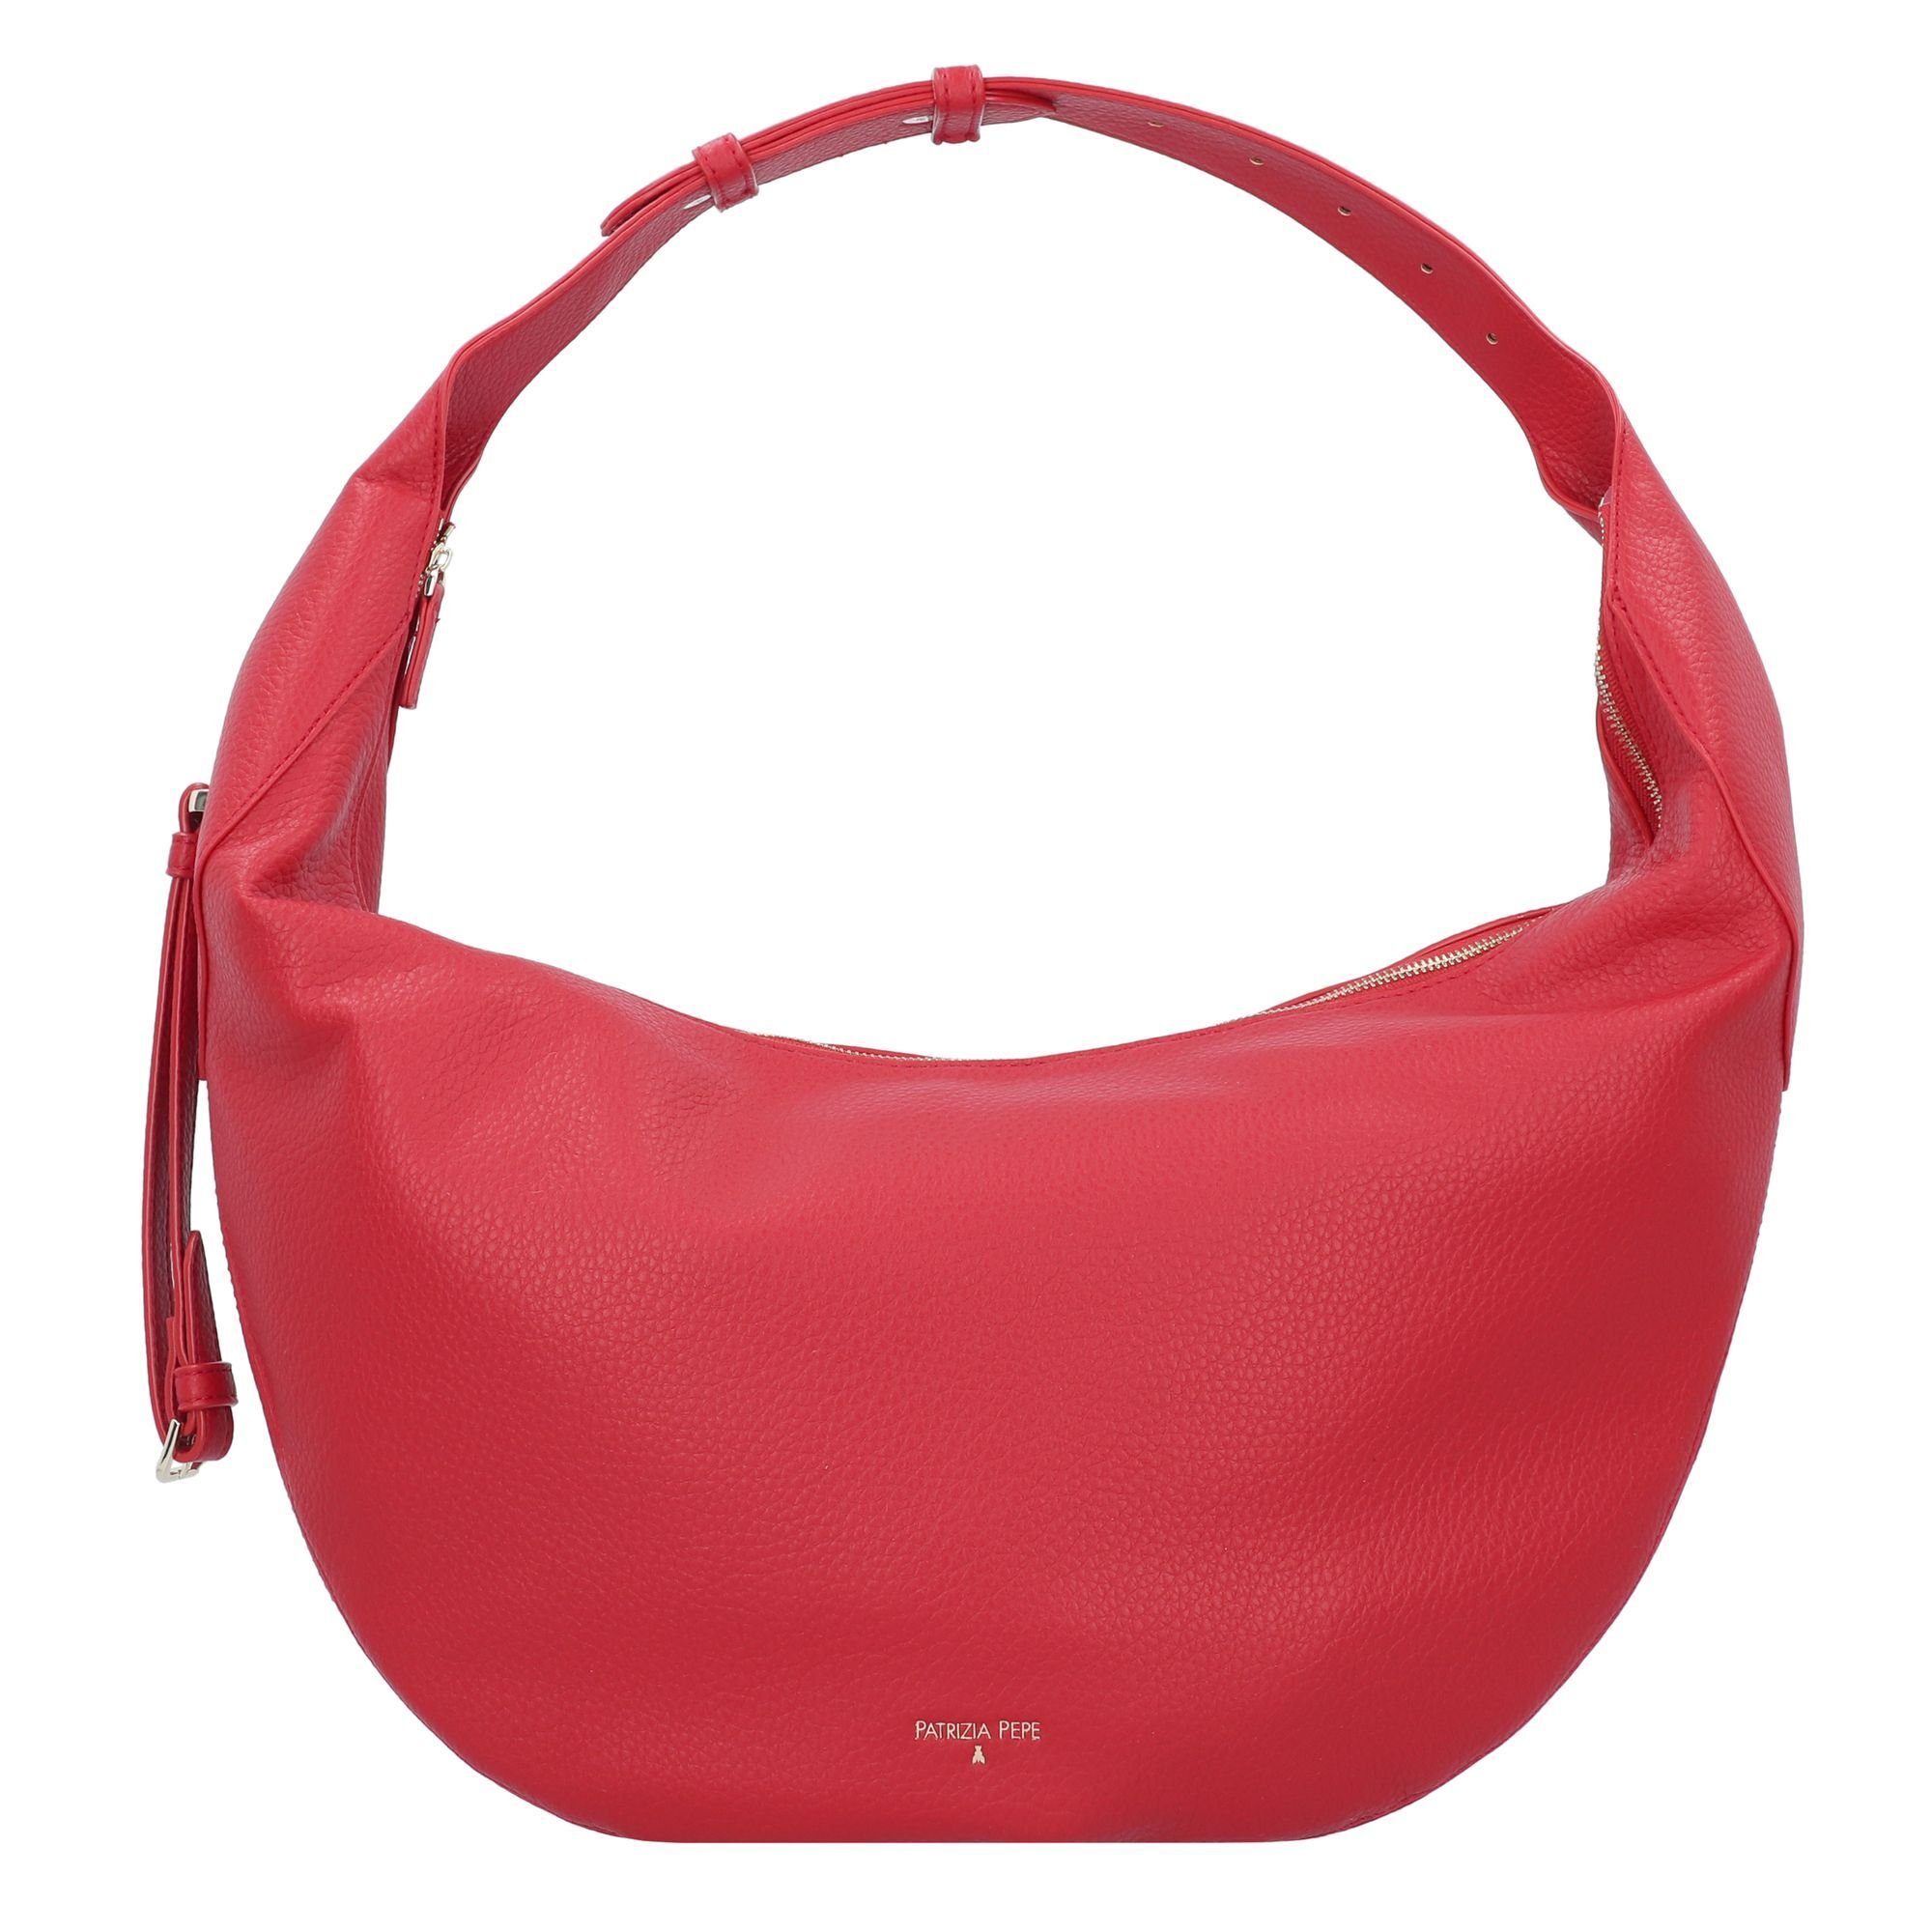 racing Polyurethan Fly, red Lounge Patrizia Pepe Schultertasche